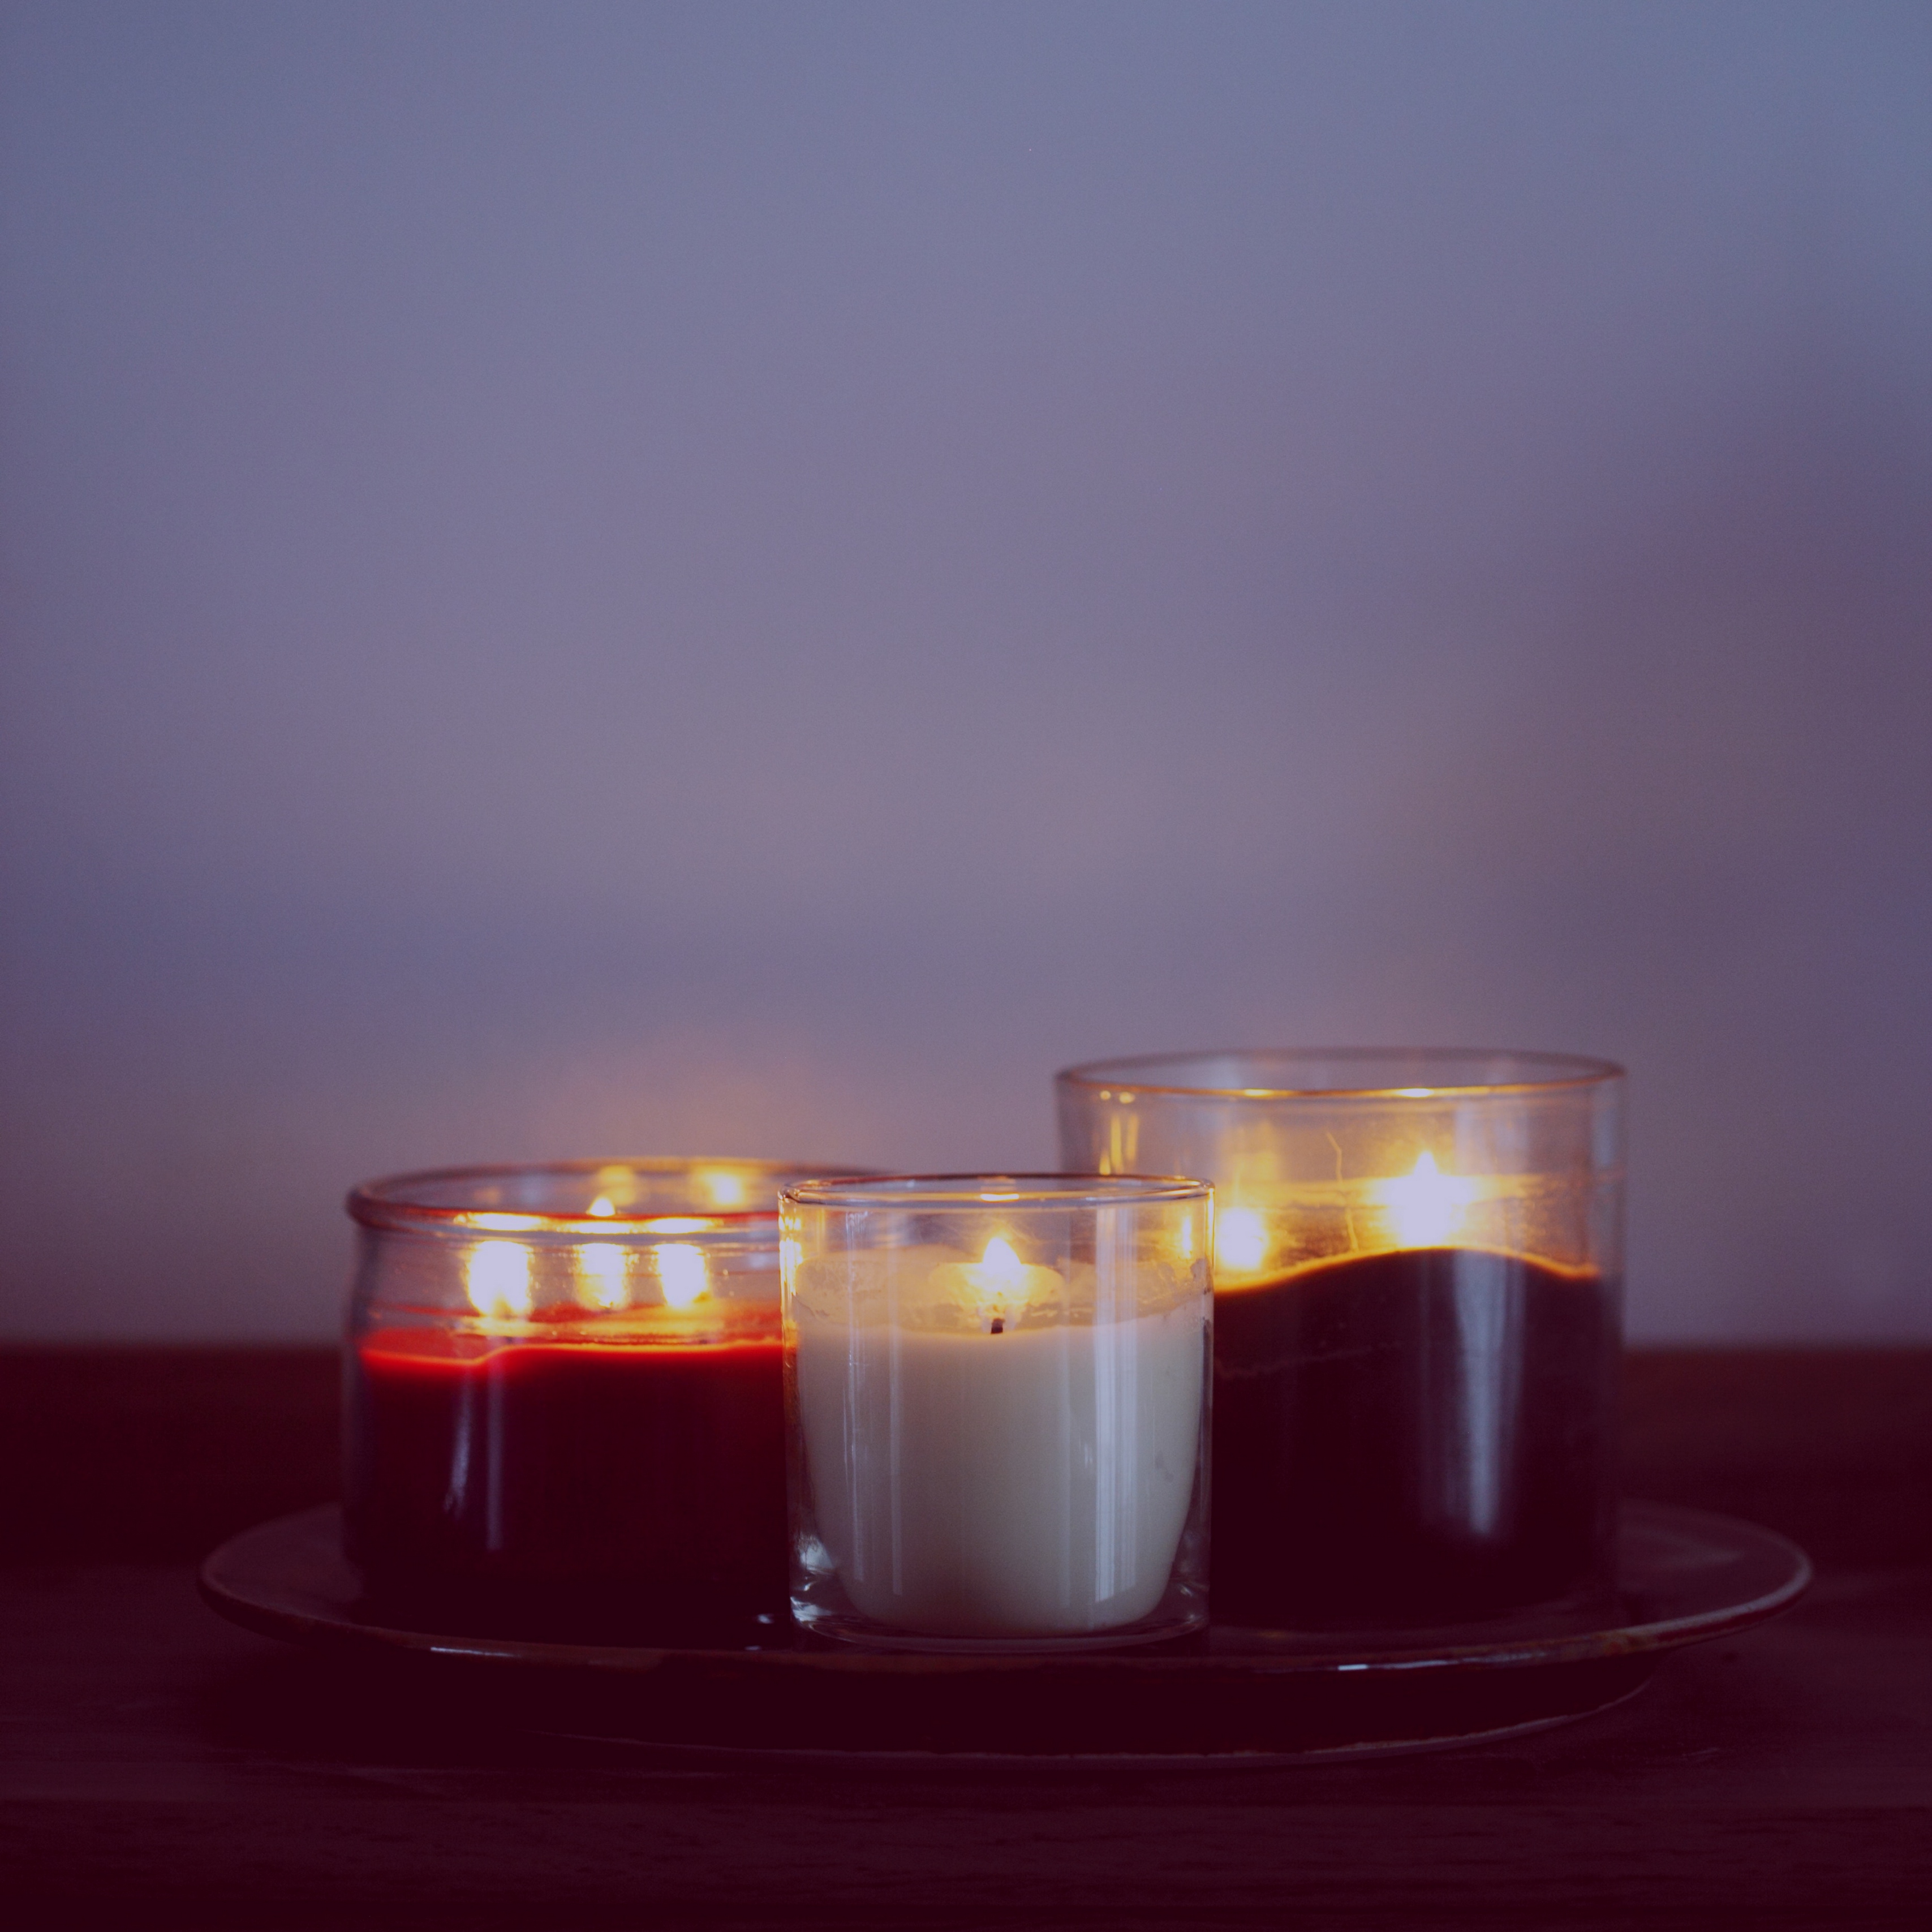 Wallpaper Candles, Table, Wax, Wick - Relationship Romantic Love Anniversary Quotes - HD Wallpaper 